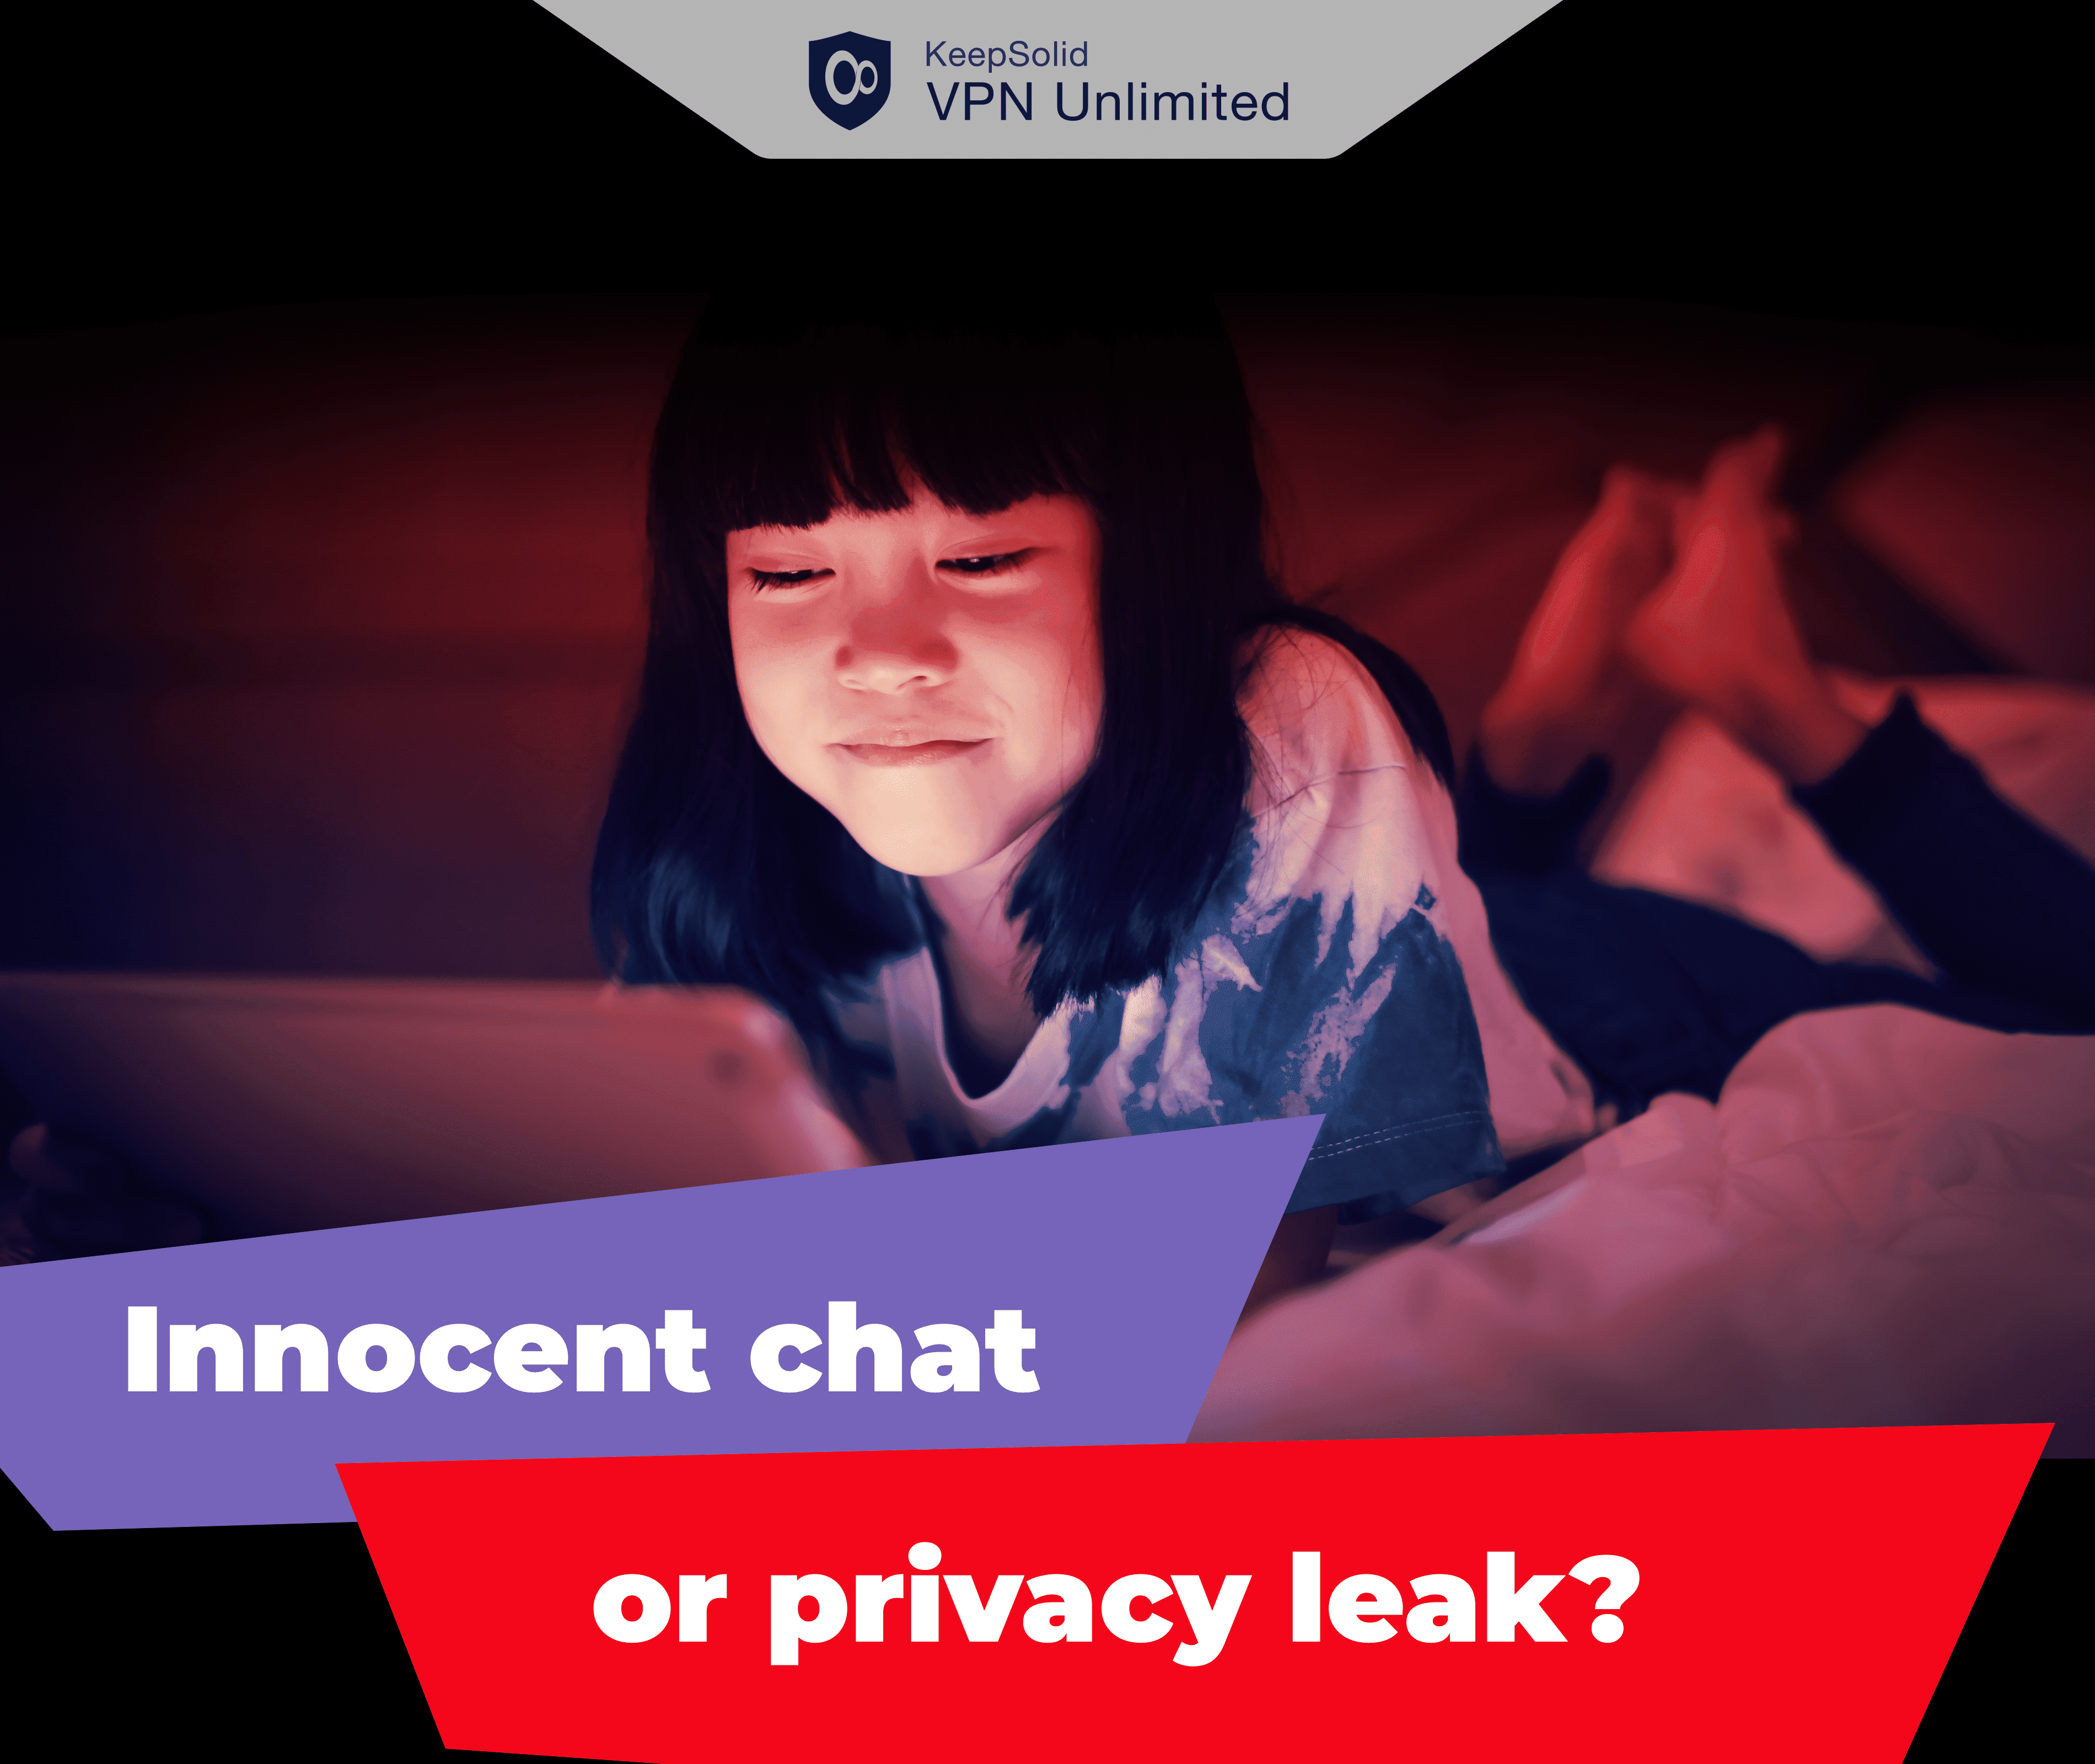 Girl enjoy using online internet for social communicate with friends, unaware of the online privacy threats